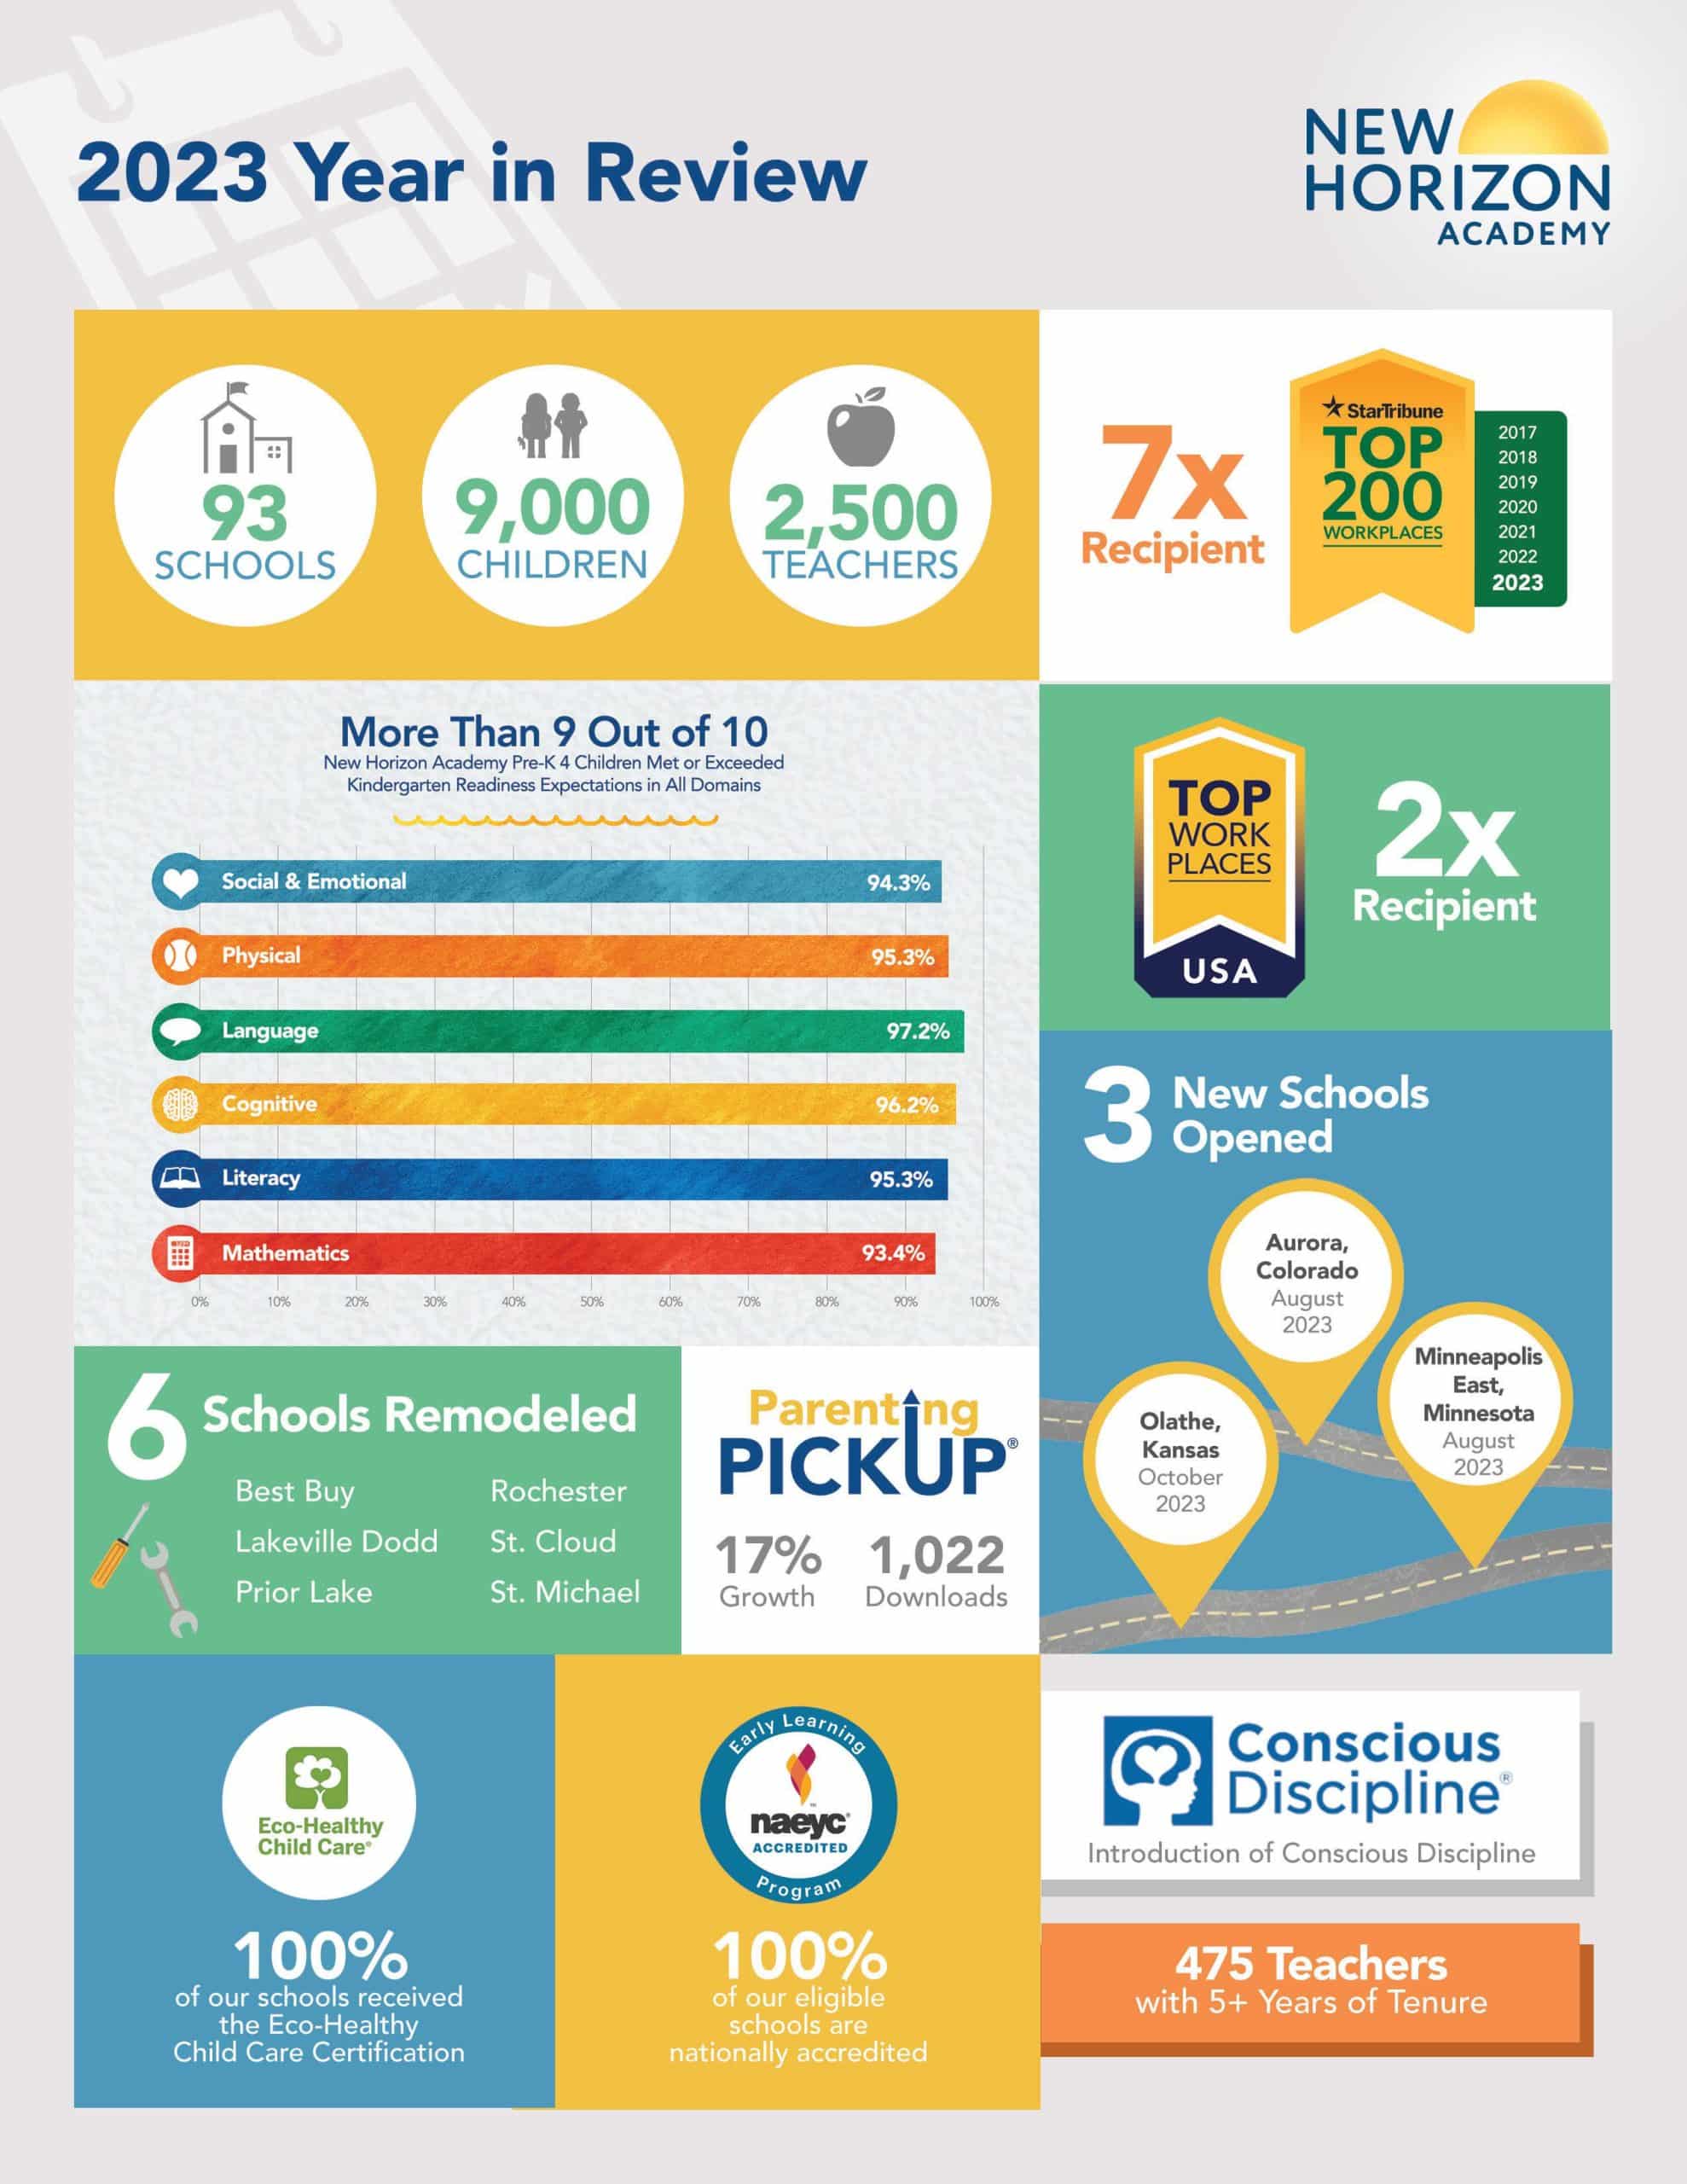 New Horizon Academy's 2023 Year in Review infographic